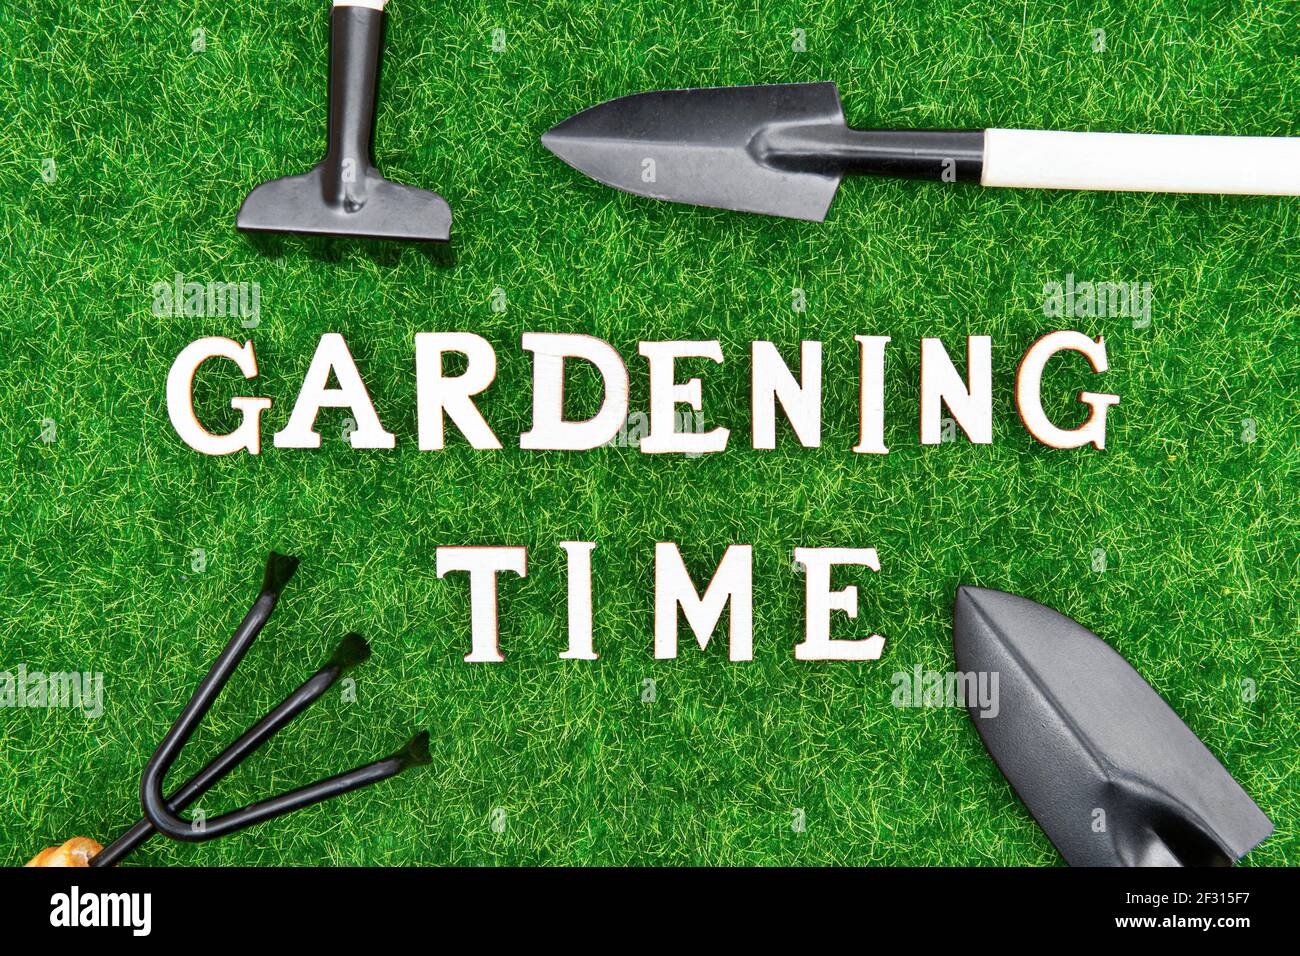 Crop view of various hand tools on synthetic grass with text made of wooden letters. Gardening time concept. Stock Photo